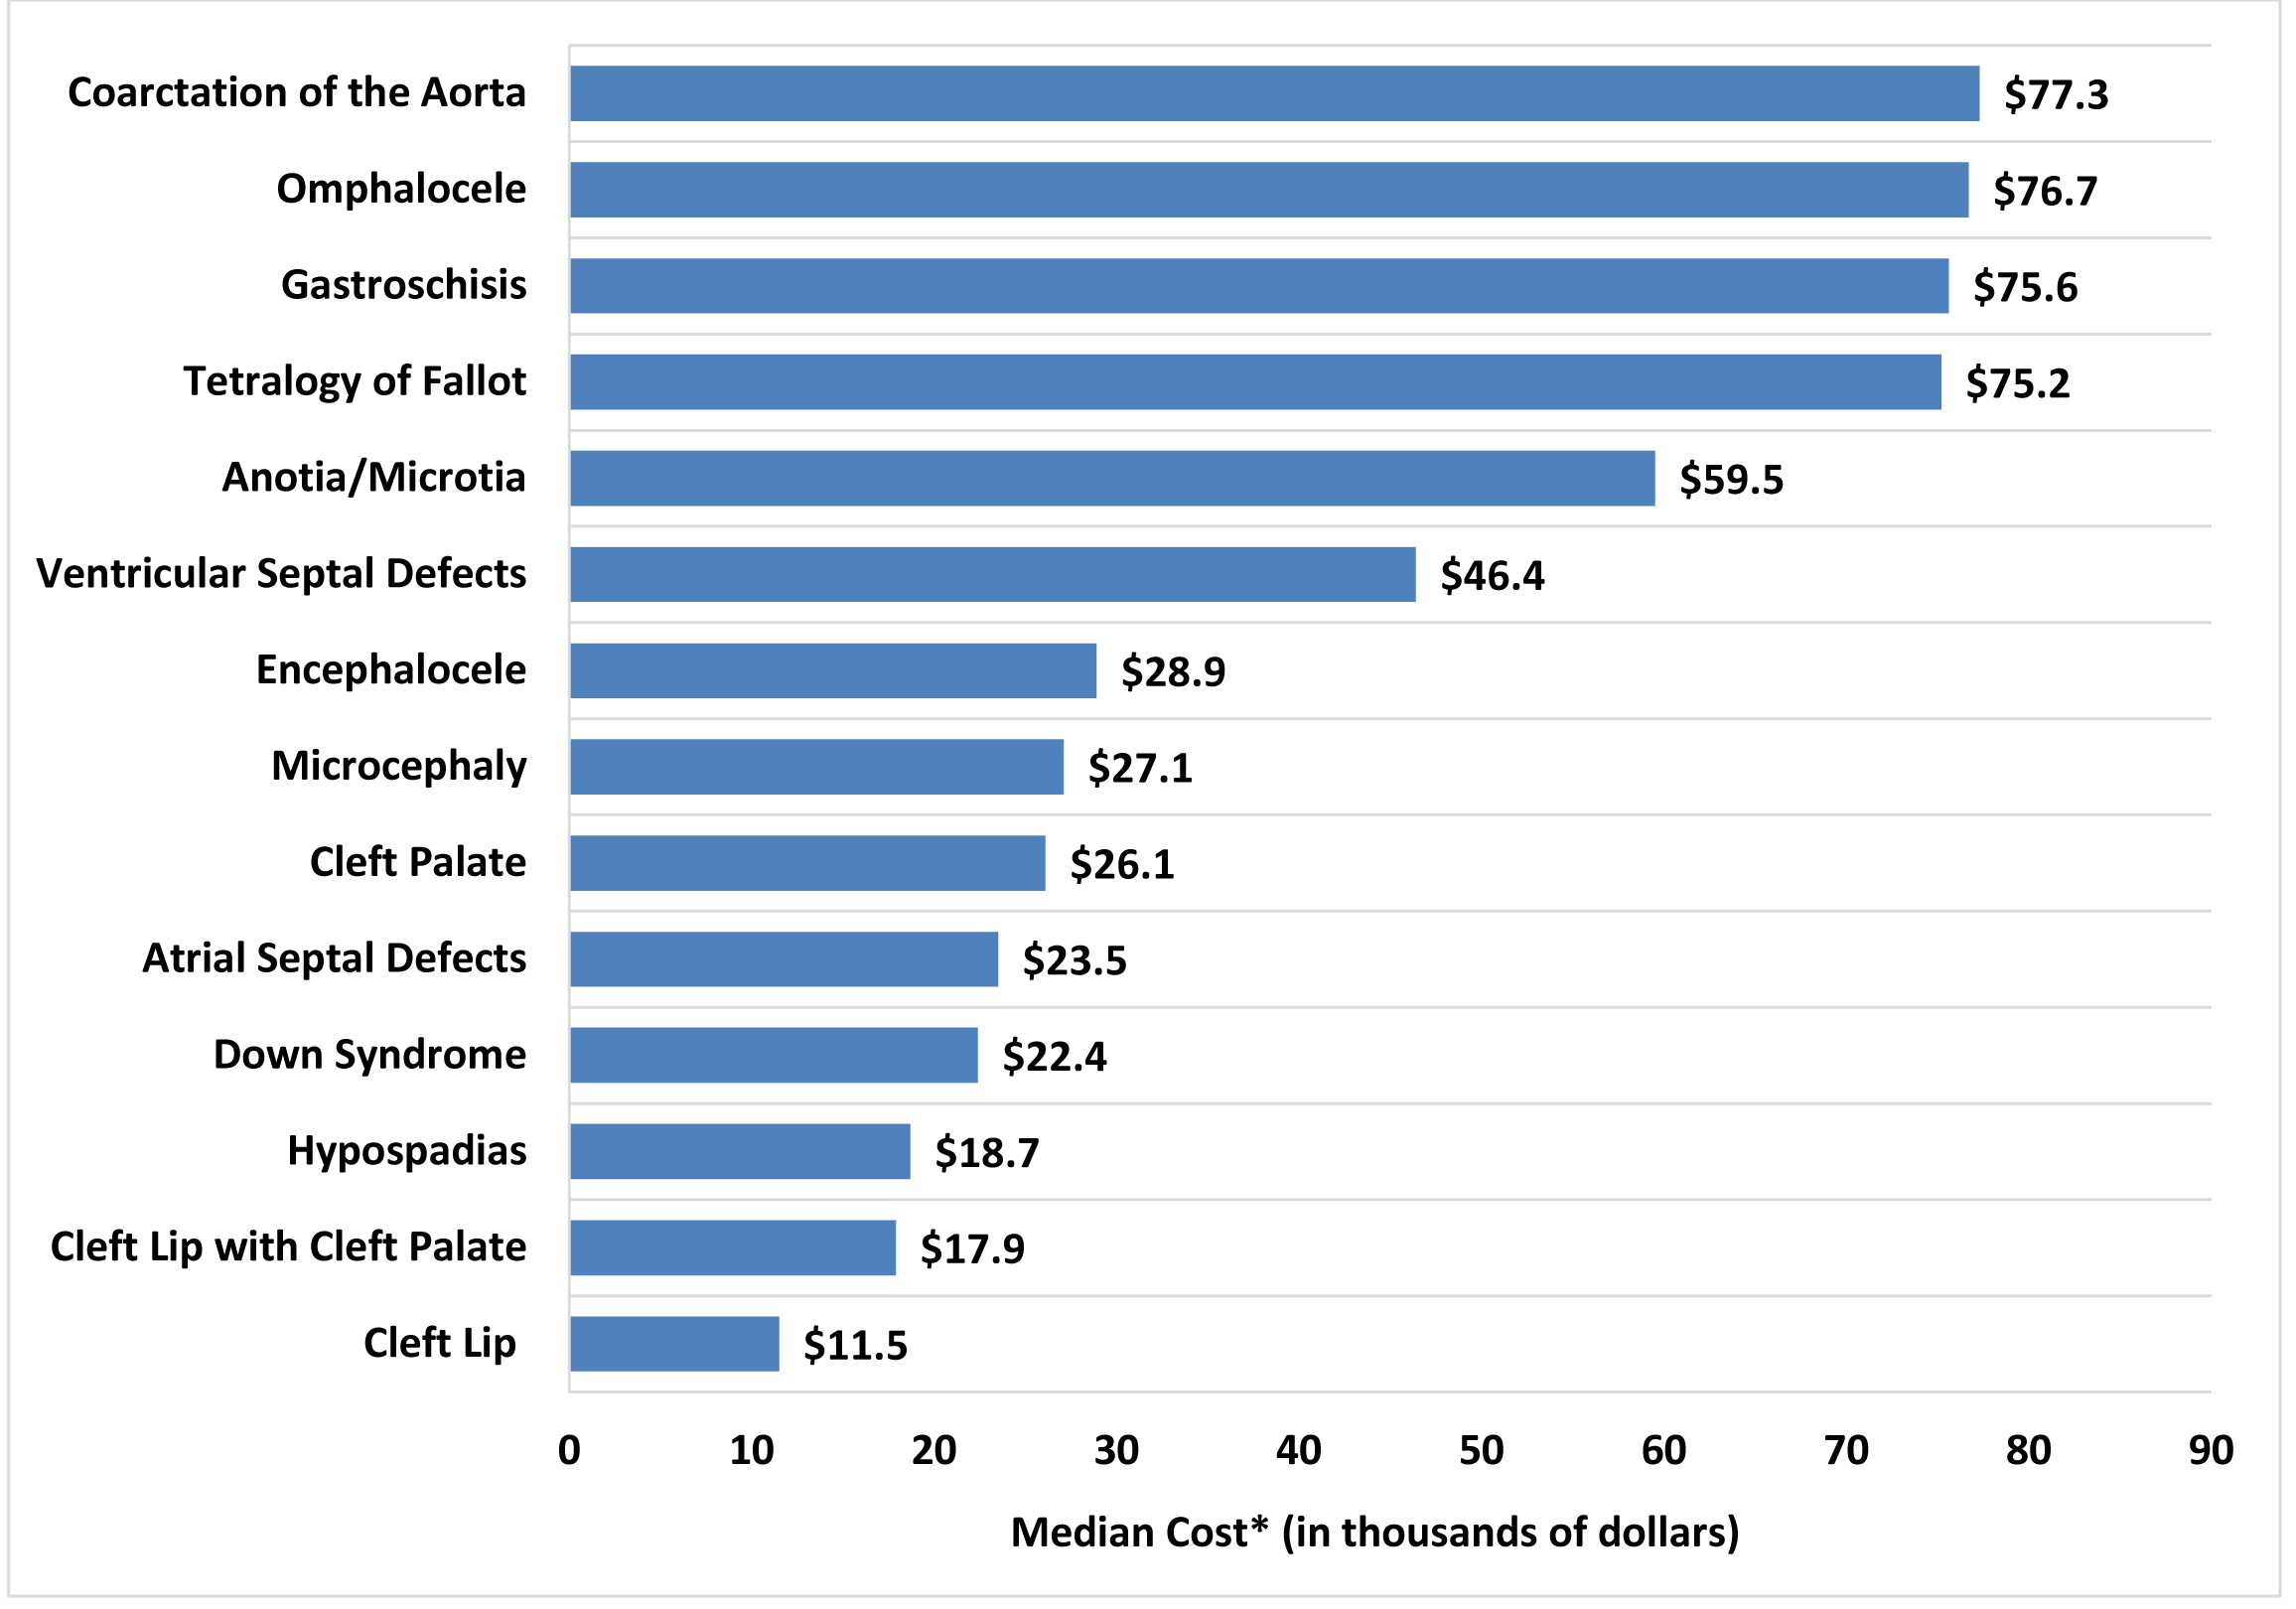 Graph shows the Median Costs of Selected Specific Birth Defects in 2013.   Coarctation of the Aorta cost 77.3 thousand dollars in 2013.   Omphalocele cost 76.7 thousand dollars in 2013.   Gastroschisis cost 75.6 thousand dollars in 2013.   Tetralogy of Fallot cost 75.2 thousand dollars in 2013.   Anotia/Microtia cost 59.5 thousand dollars in 2013.   Ventricular Septal Defects cost 46.4 thousand dollars in 2013.   Encephalocele cost 28.9 thousand dollars in 2013.   Microcephaly cost 27.1 thousand dollars in 2013.   Cleft Palate cost 26.1 thousand dollars in 2013.   Atrial Septal Defects cost 23.5 thousand dollars in 2013.   Down Syndrome cost 22.4 thousand dollars in 2013.   Hypospadias cost 18.7 thousand dollars in 2013.   Cleft Lip with Cleft Palate cost 17.9 thousand dollars in 2013.   Cleft Lip cost 11.5 thousand dollars in 2013.   Median cost can be found by arranging all costs for each specific birth defect from the lowest cost to highest cost and picking the middle one.